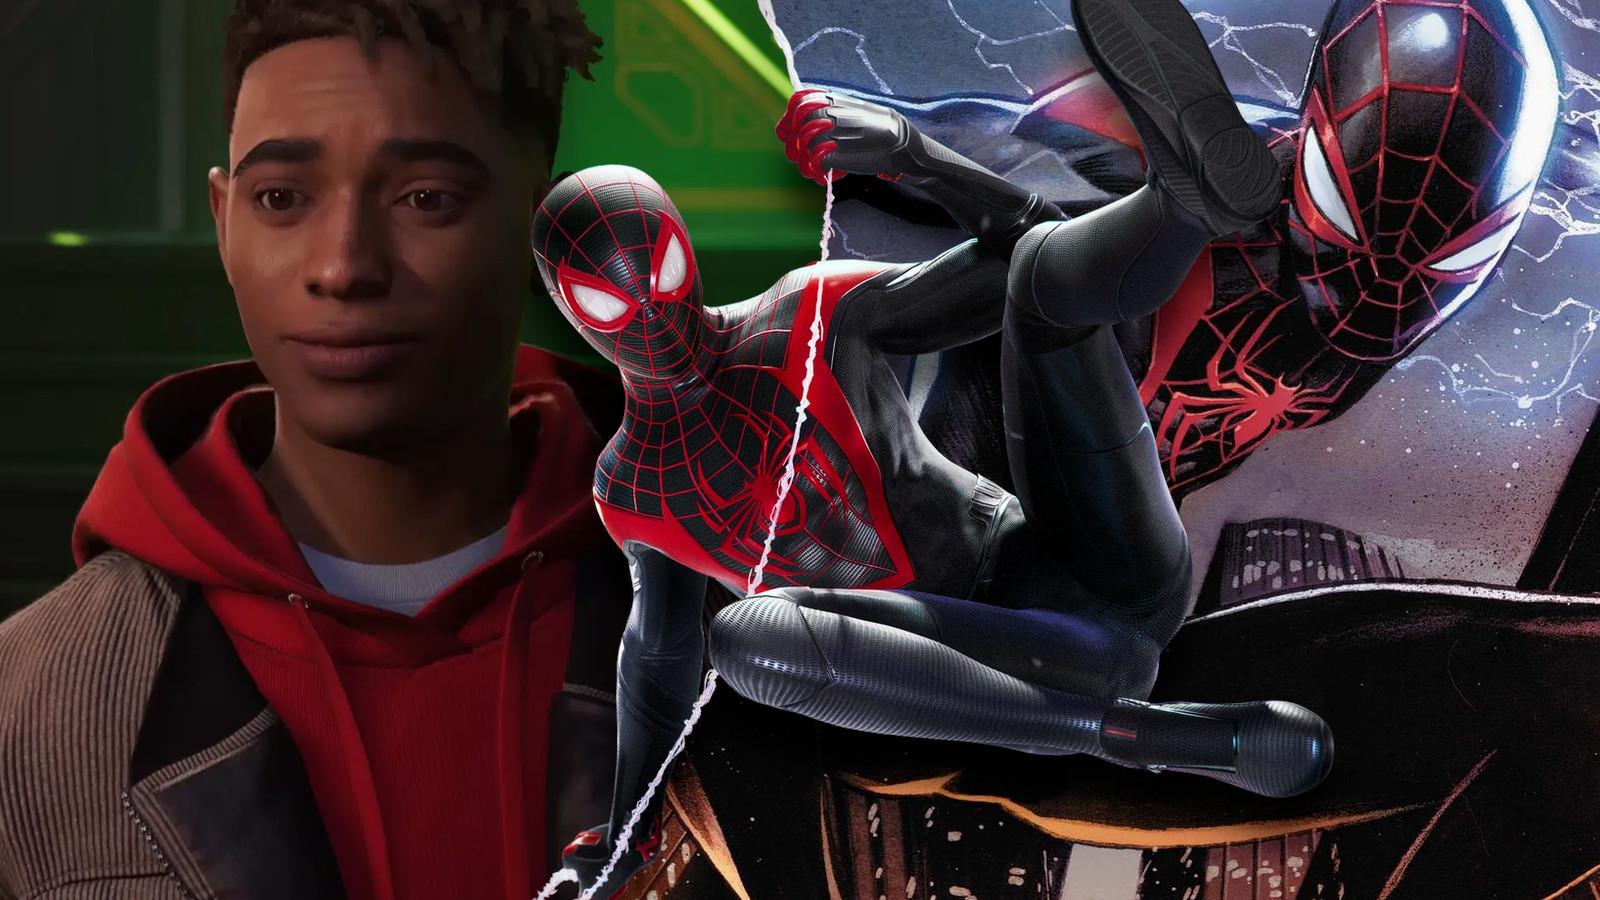 Is Marvel's Spider-Man 2 coming to Nintendo Switch? - Dexerto